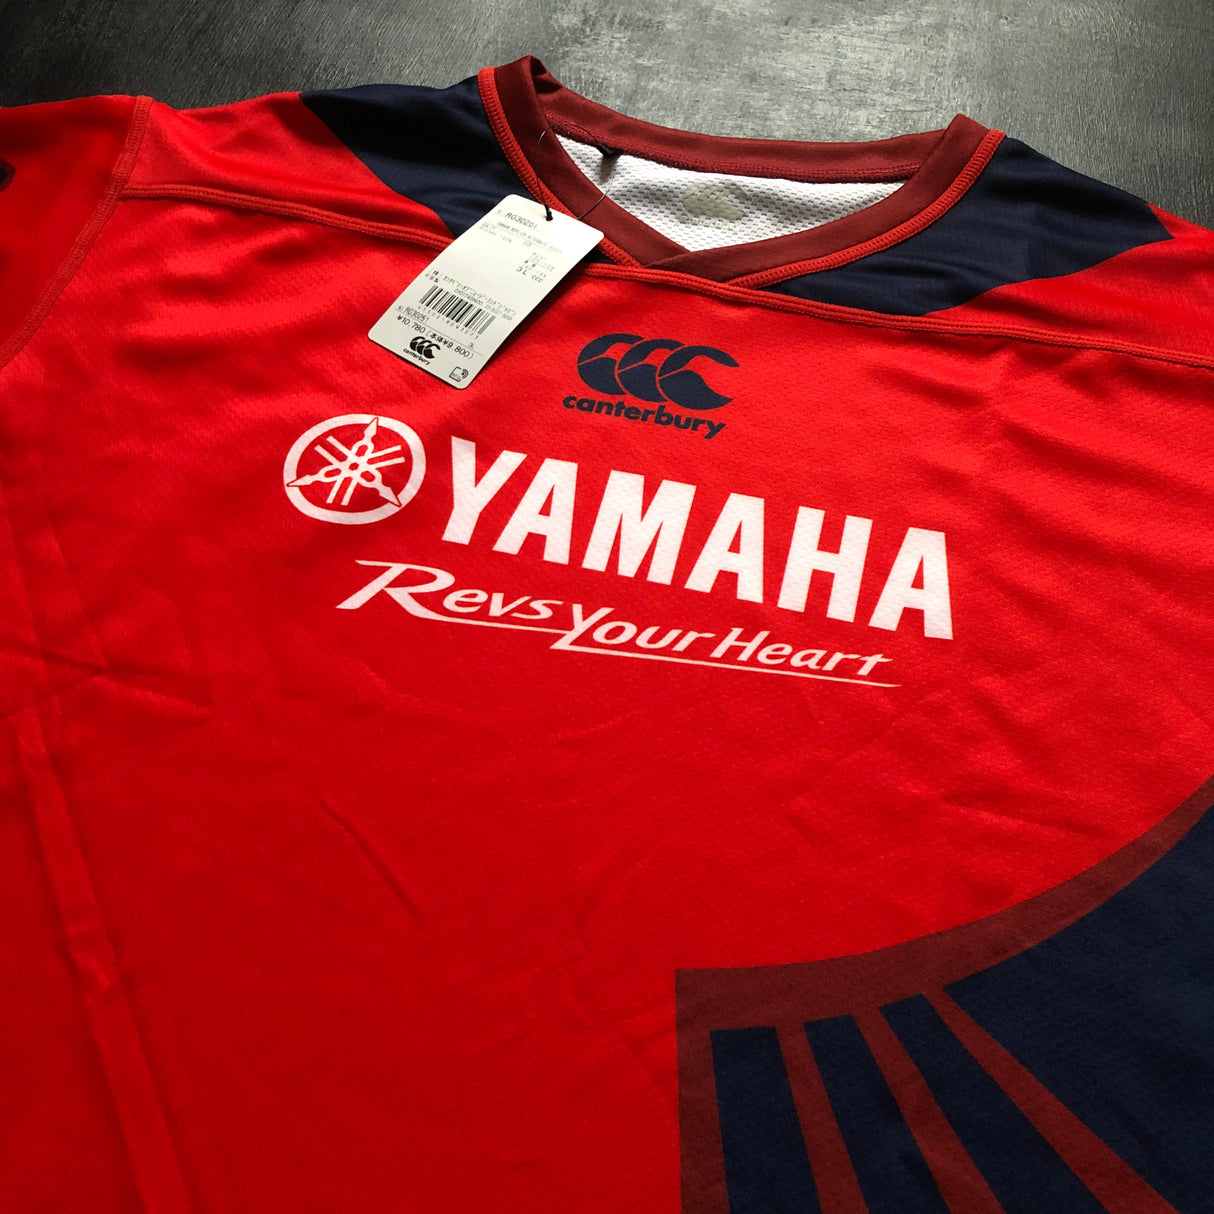 Yamaha Júbilo Rugby Team Shirt 2021 (Japan Top League) 3L BNWT Underdog Rugby - The Tier 2 Rugby Shop 